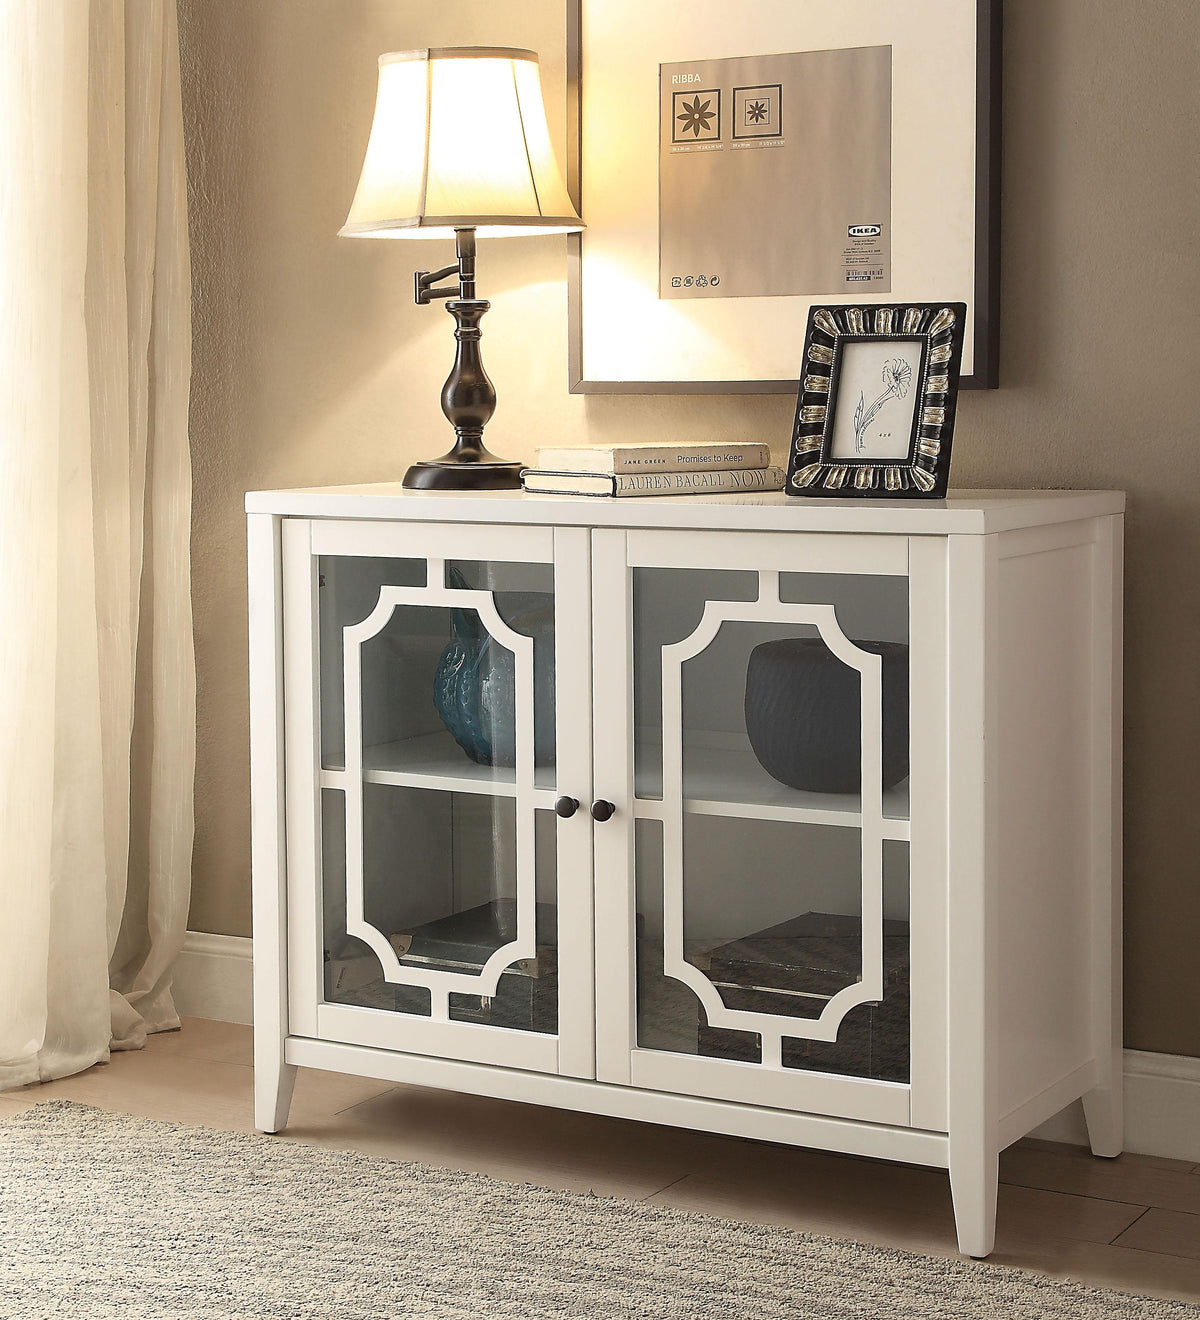 Ceara White Console Table  Las Vegas Furniture Stores